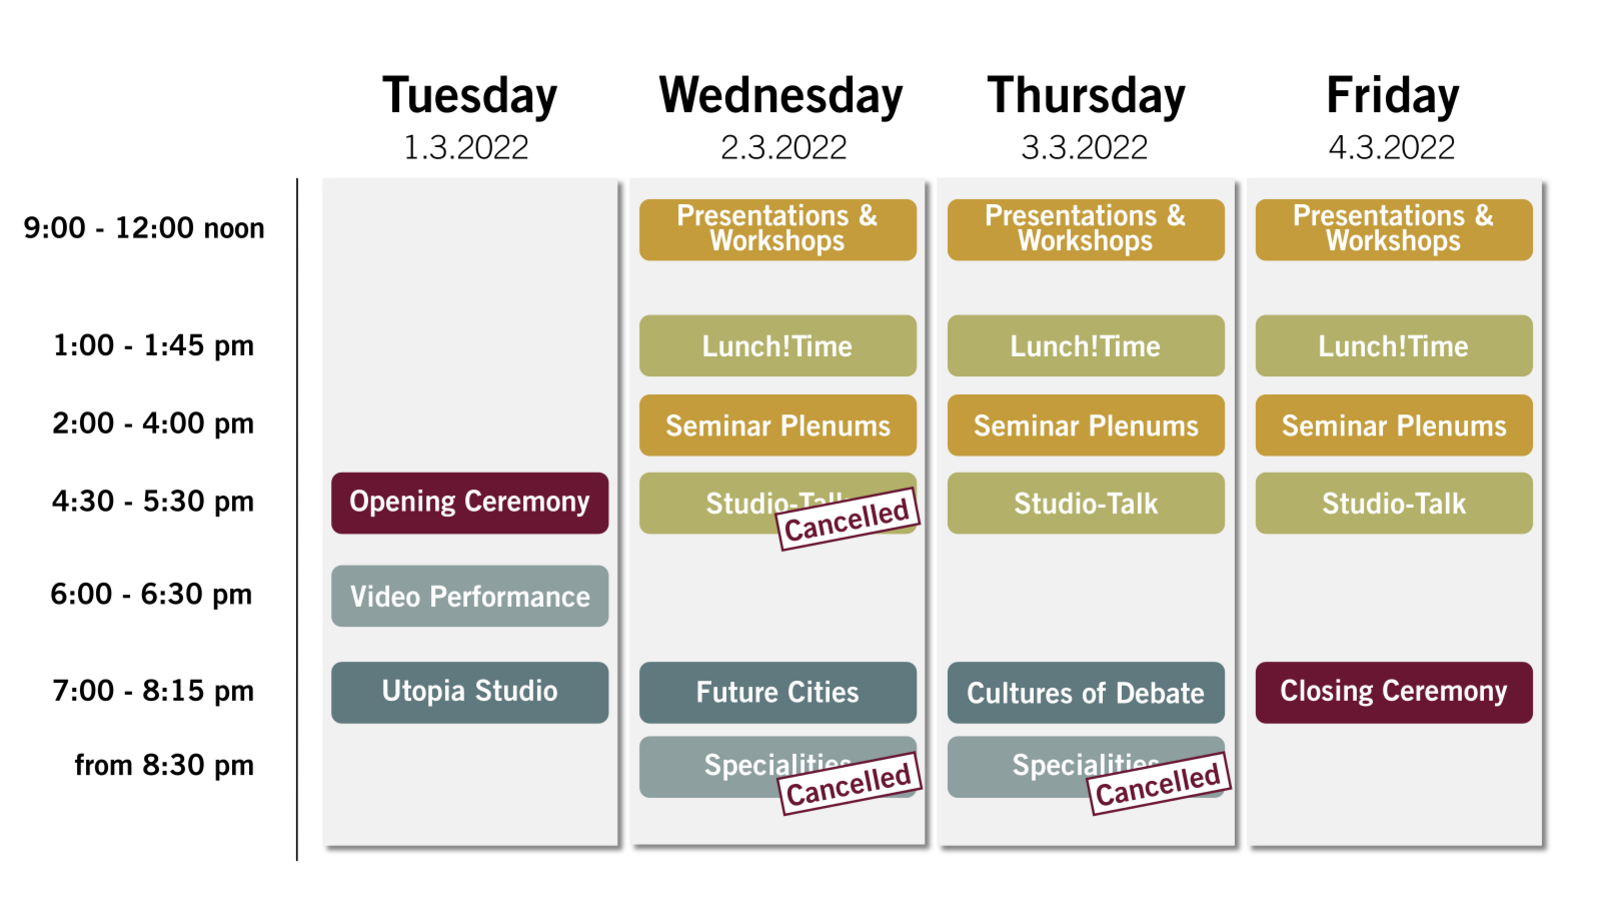 Overview of the 2022 Conference Week programme